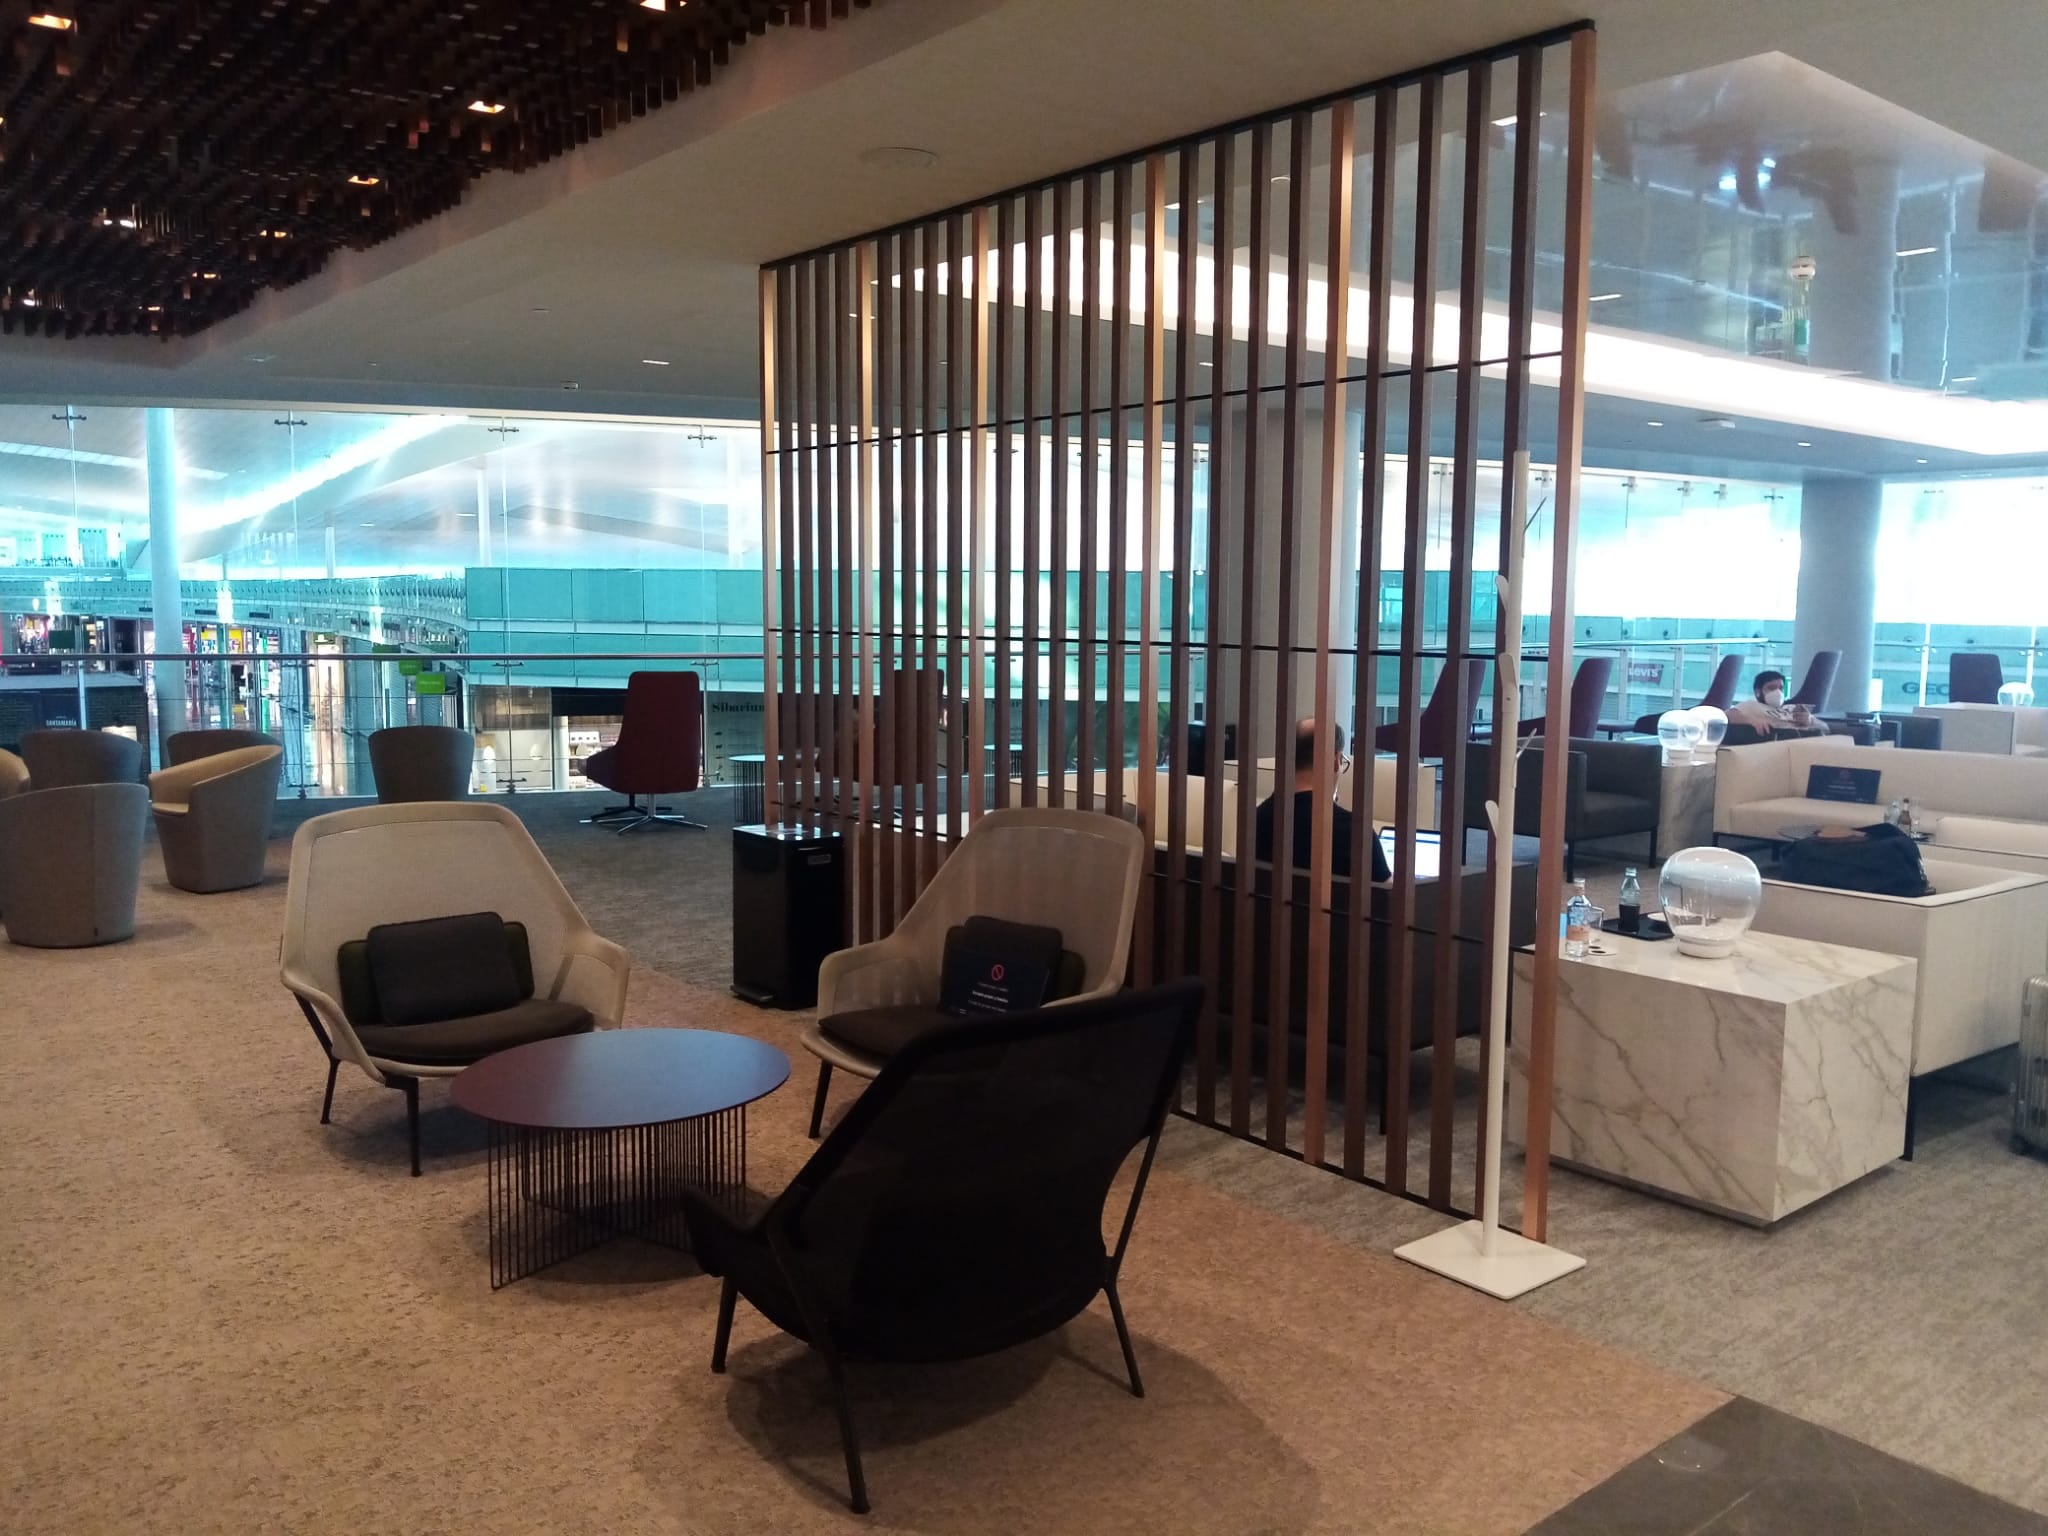 Premium Air Lounge. Vip lounge Pau Casals at Barcelona airport. Best VIP lounge of the world by Priority Pass. Shengen flyes.